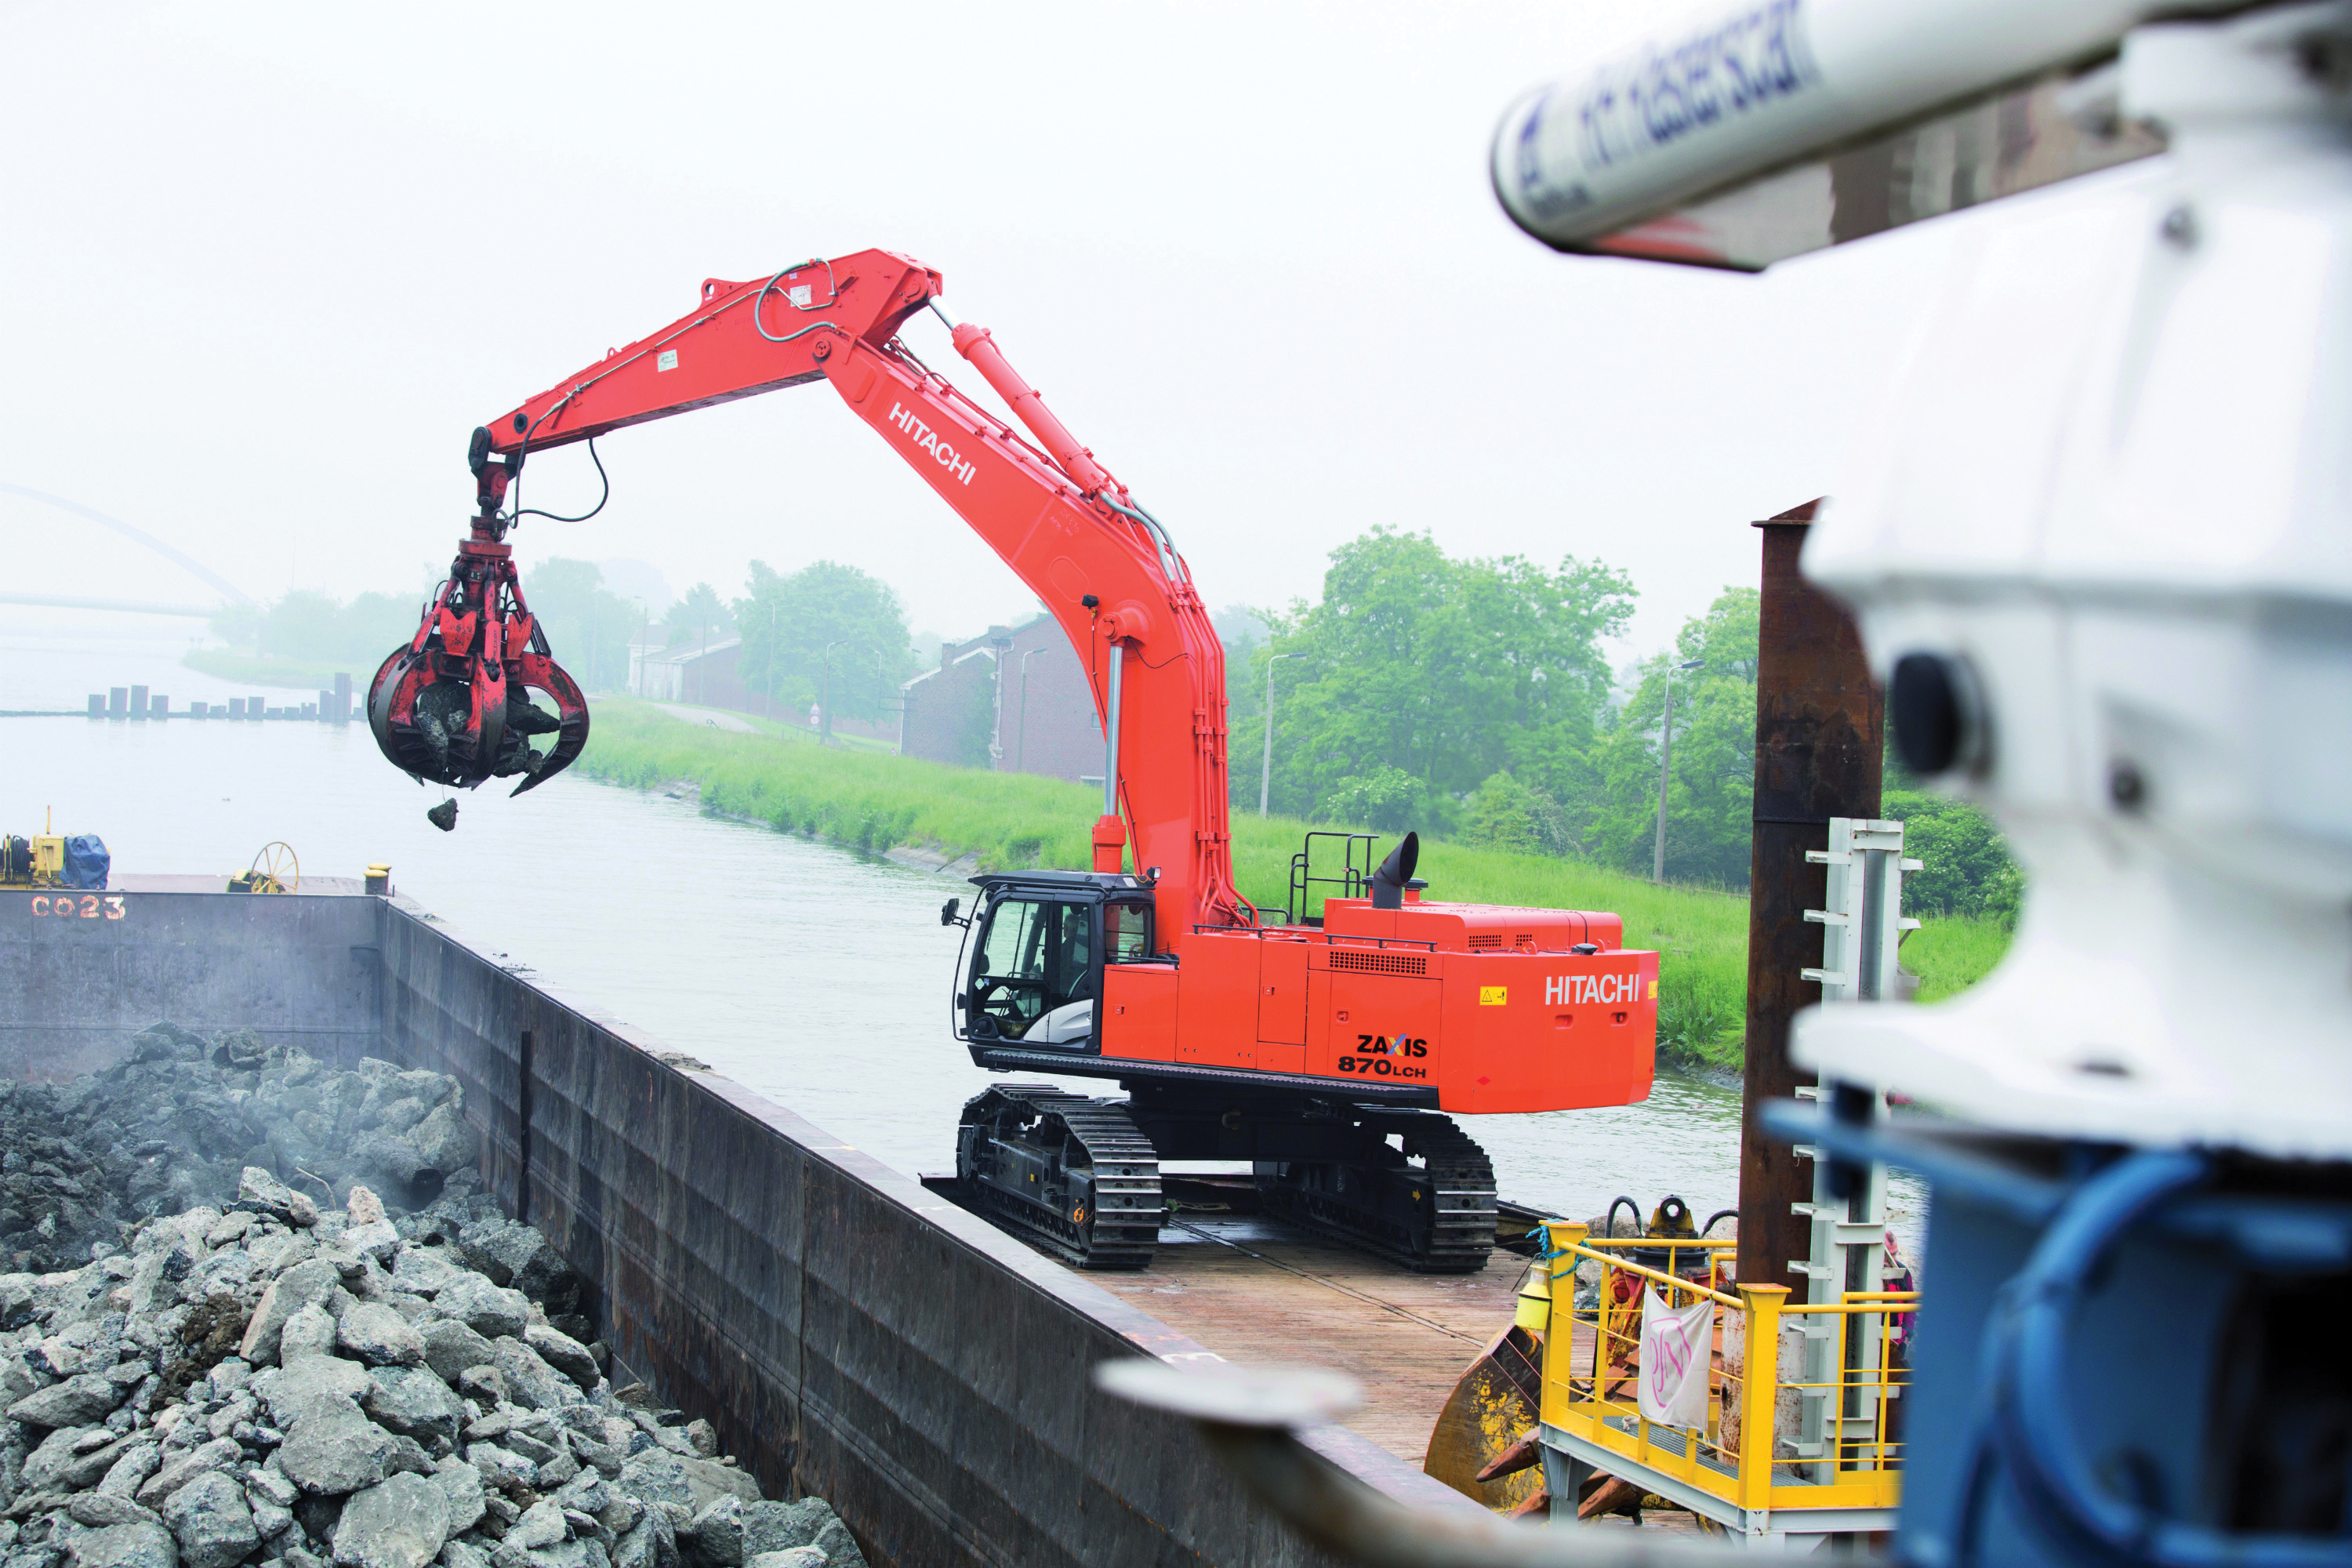 The ZX870LCH-5 is part of the Zaxis-5 range from Hitachi